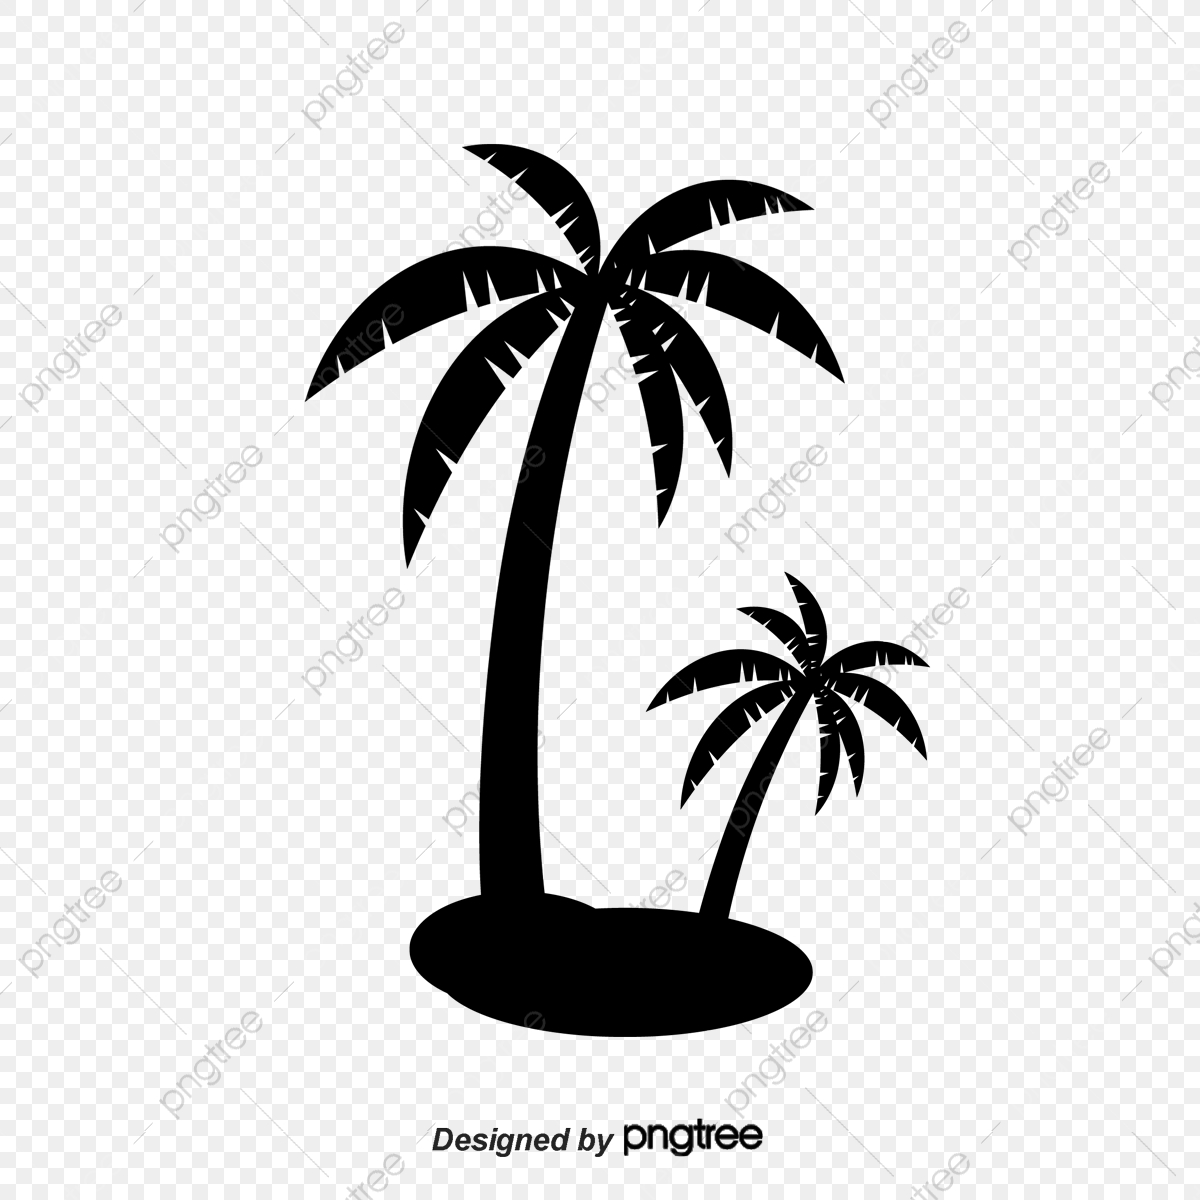 Sunset clipart coconut tree, Sunset coconut tree Transparent FREE for ...